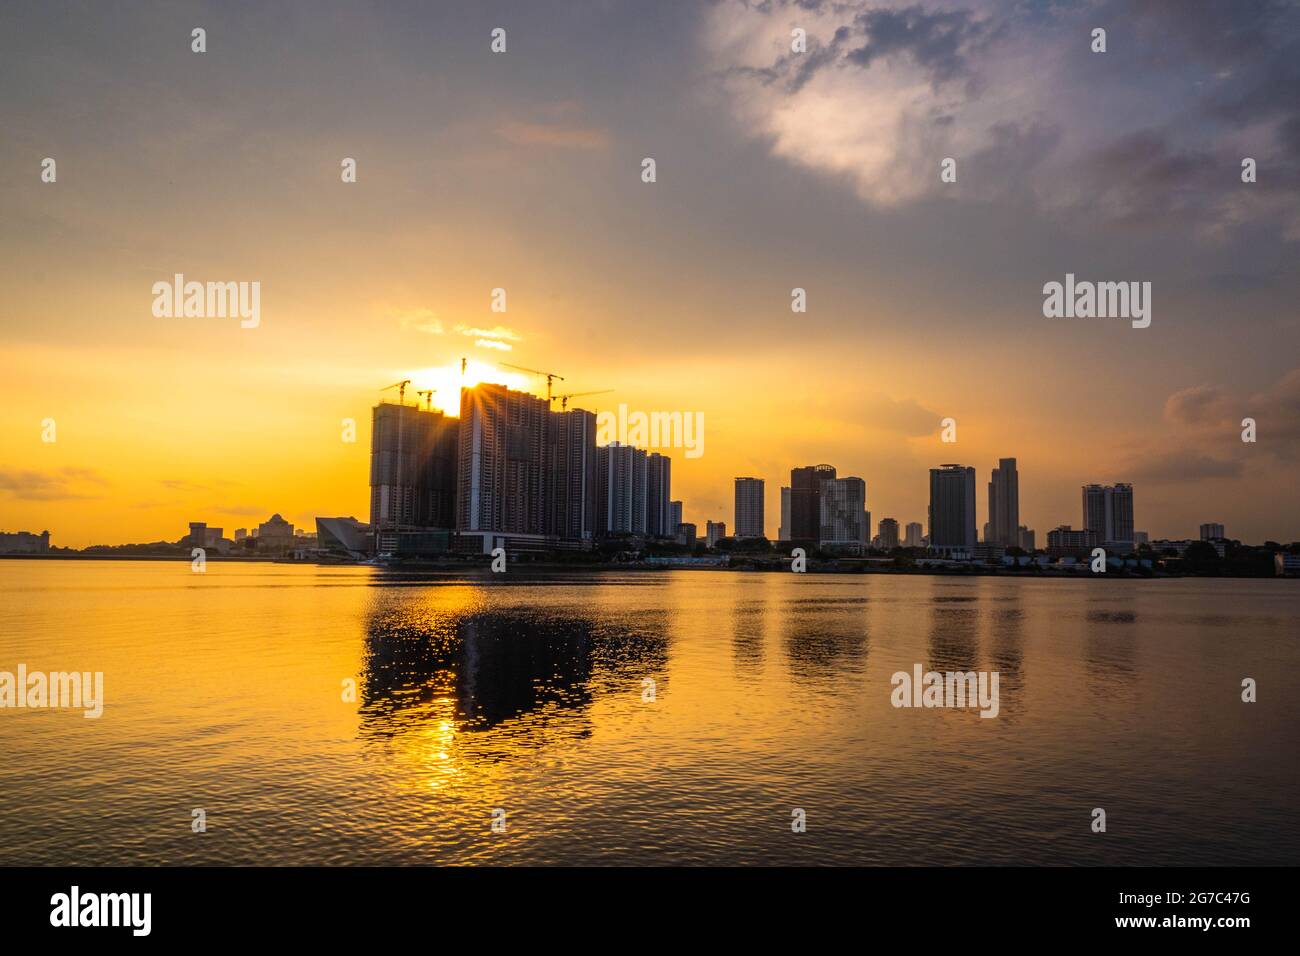 Sunset view from Woodlands Waterfront Park in central Singapore. Stock Photo